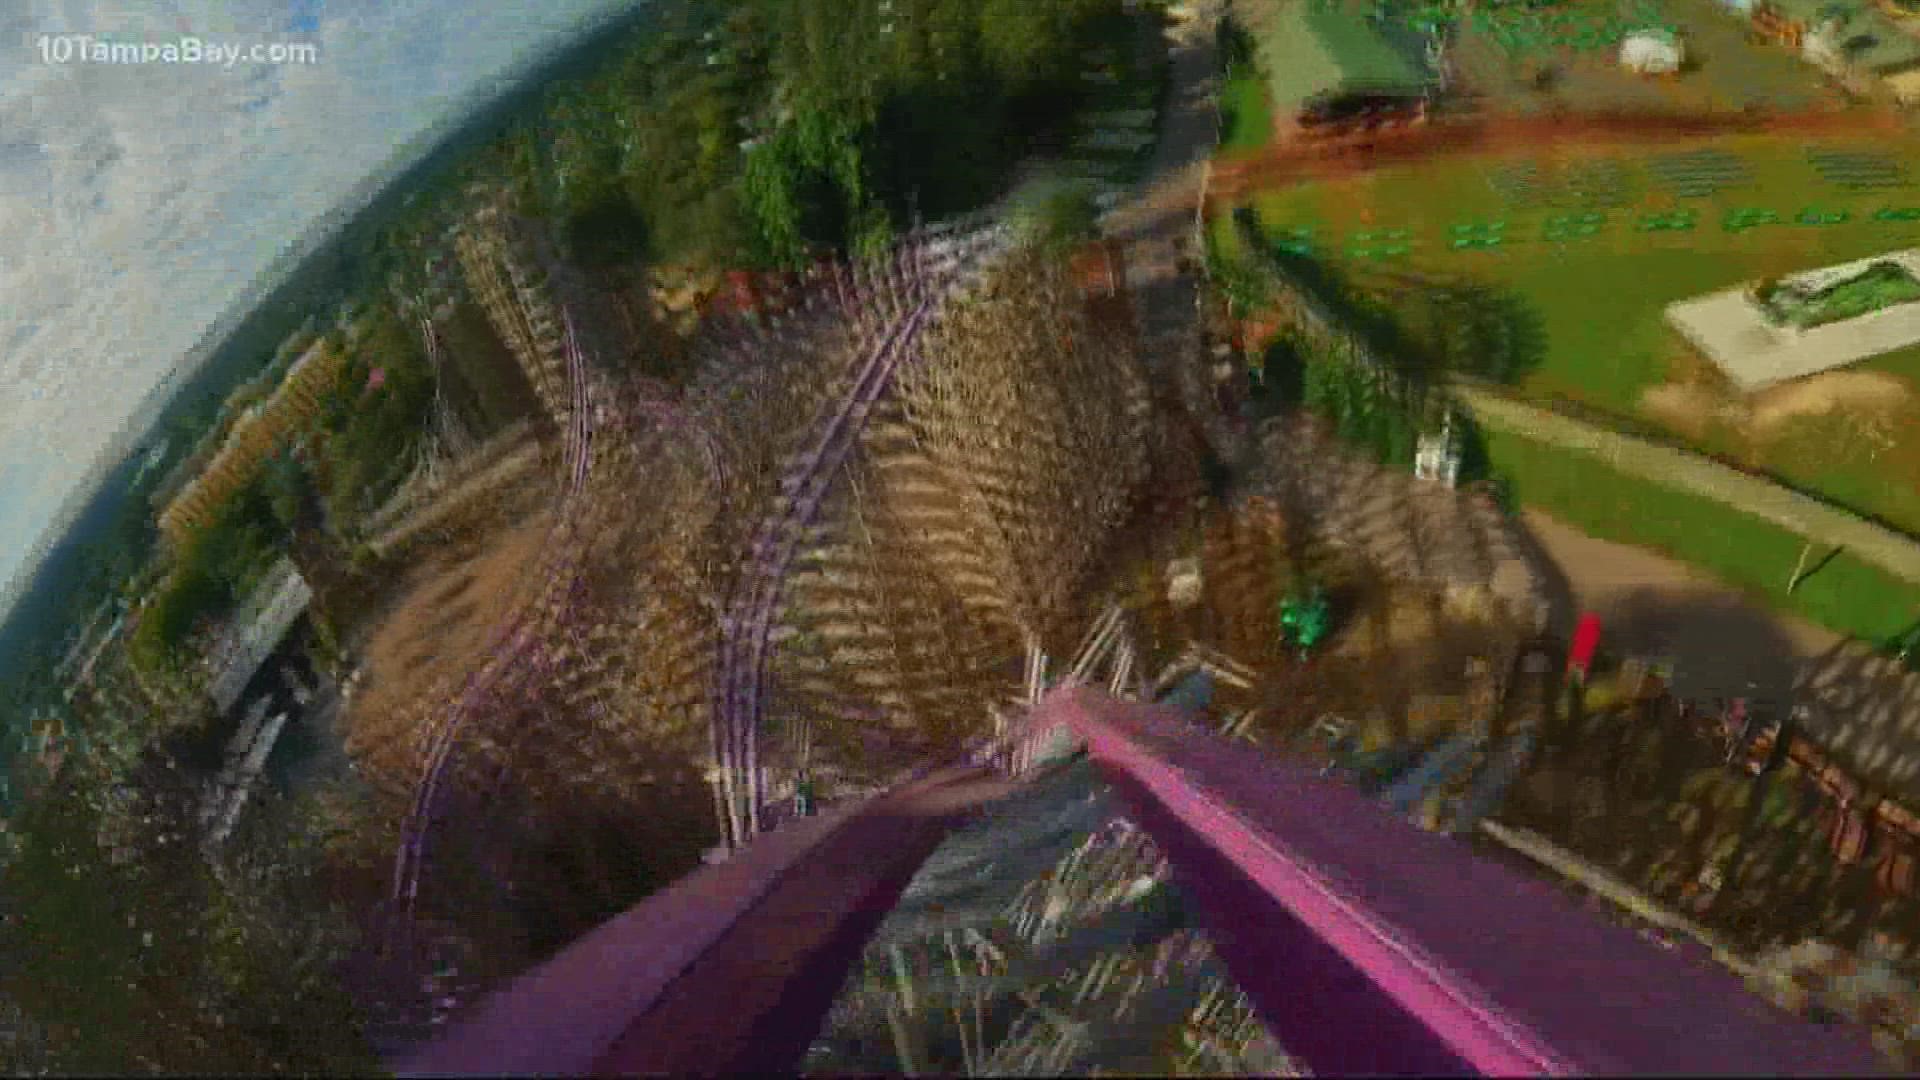 The theme park previewed the new ride, which will be "the fastest and steepest hybrid coaster in the world."